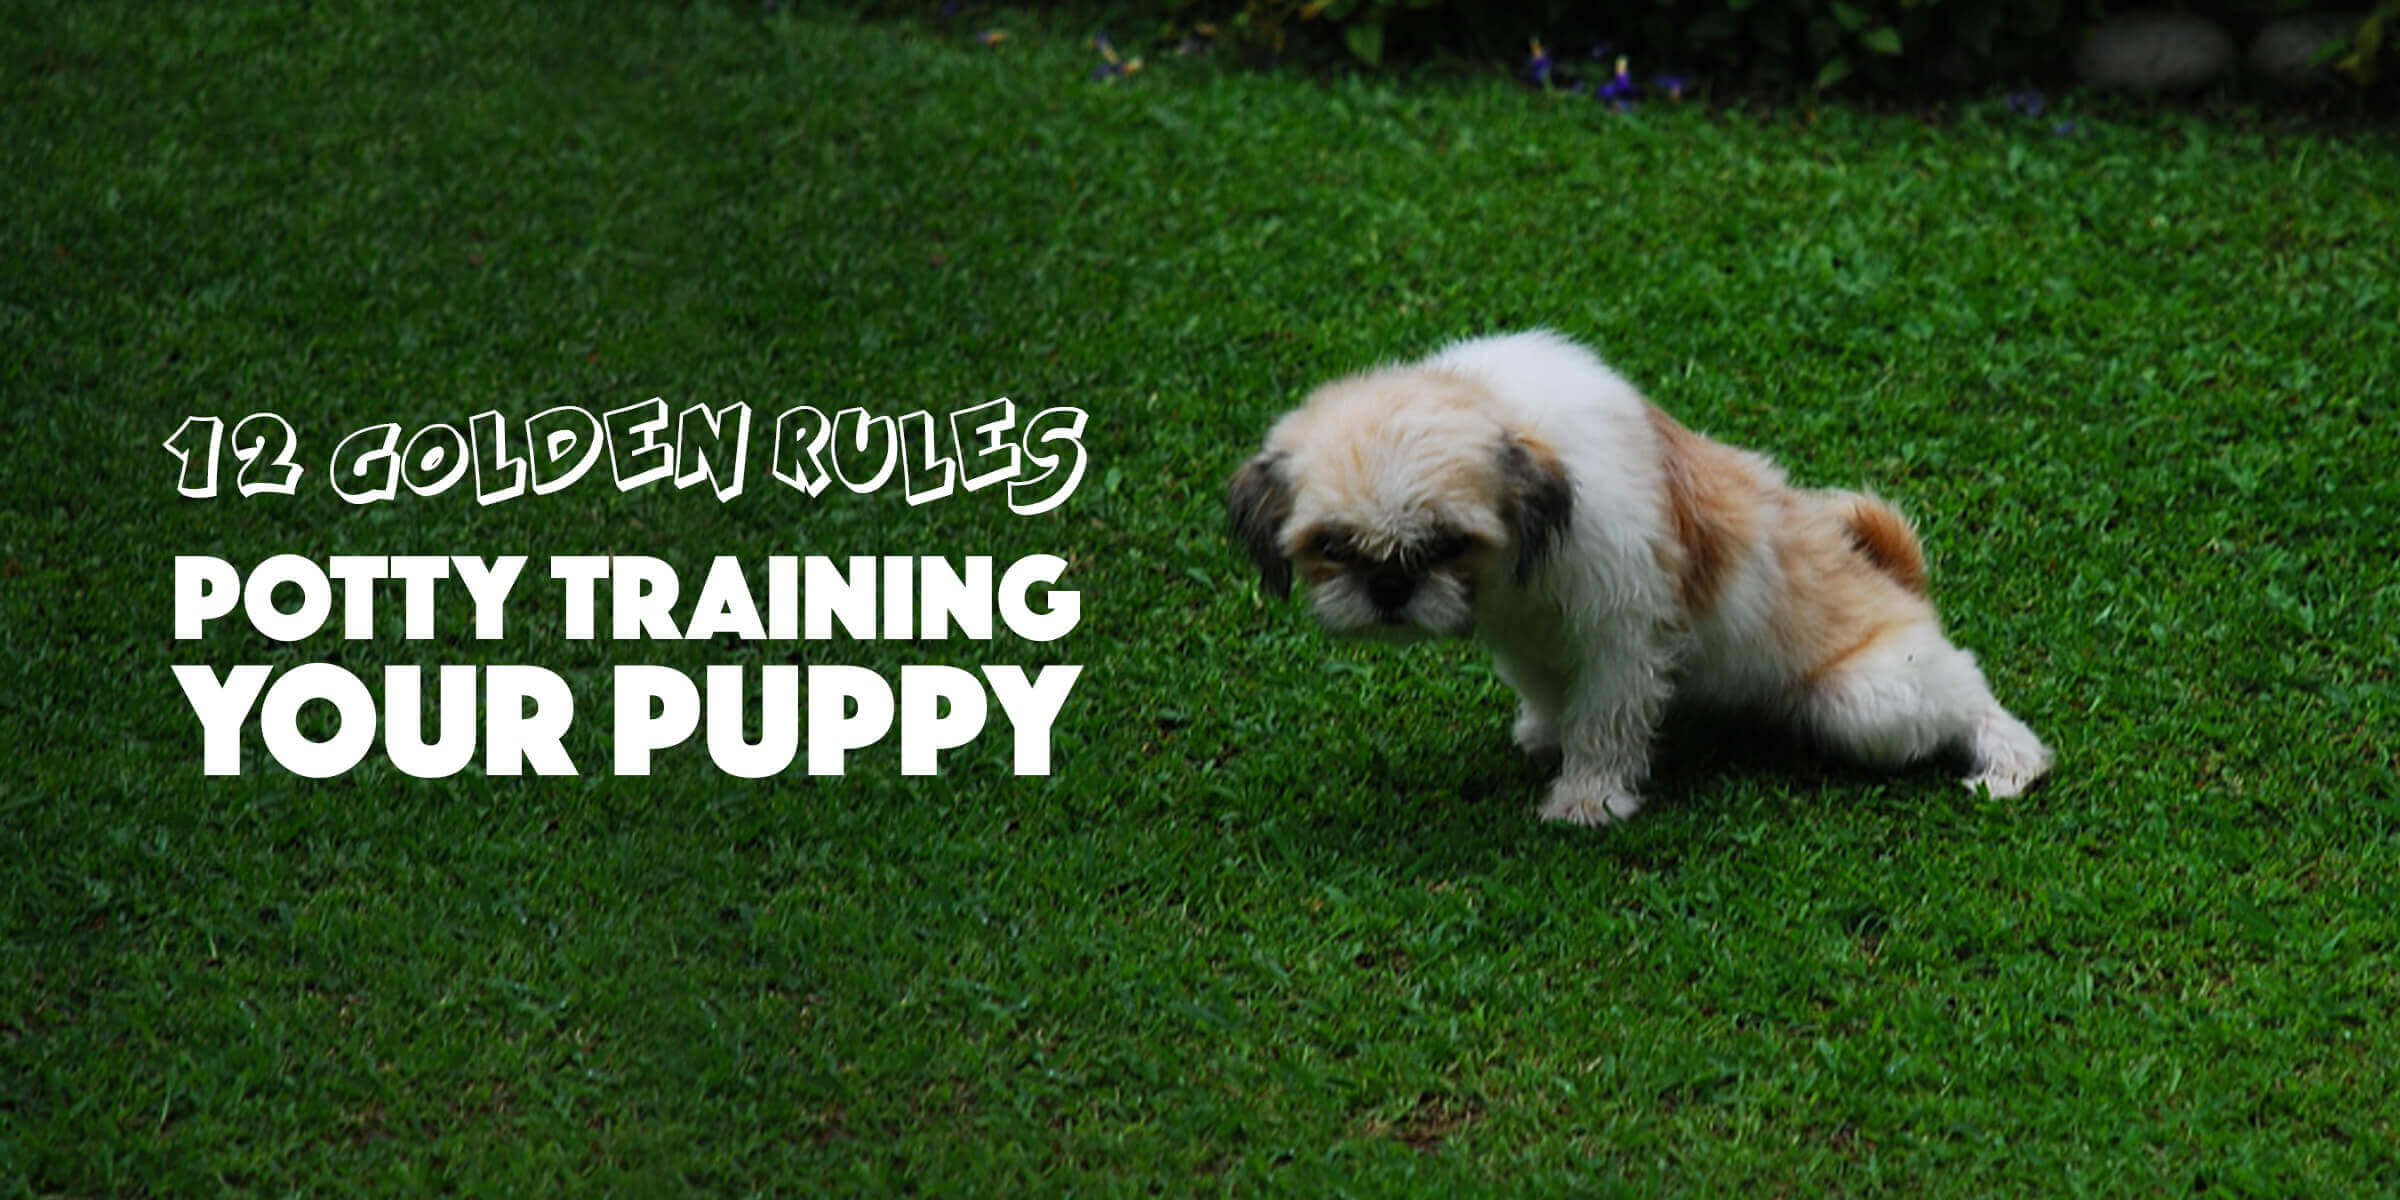 puppy-potty-training-12-golden-tips-to-do-it-the-right-way